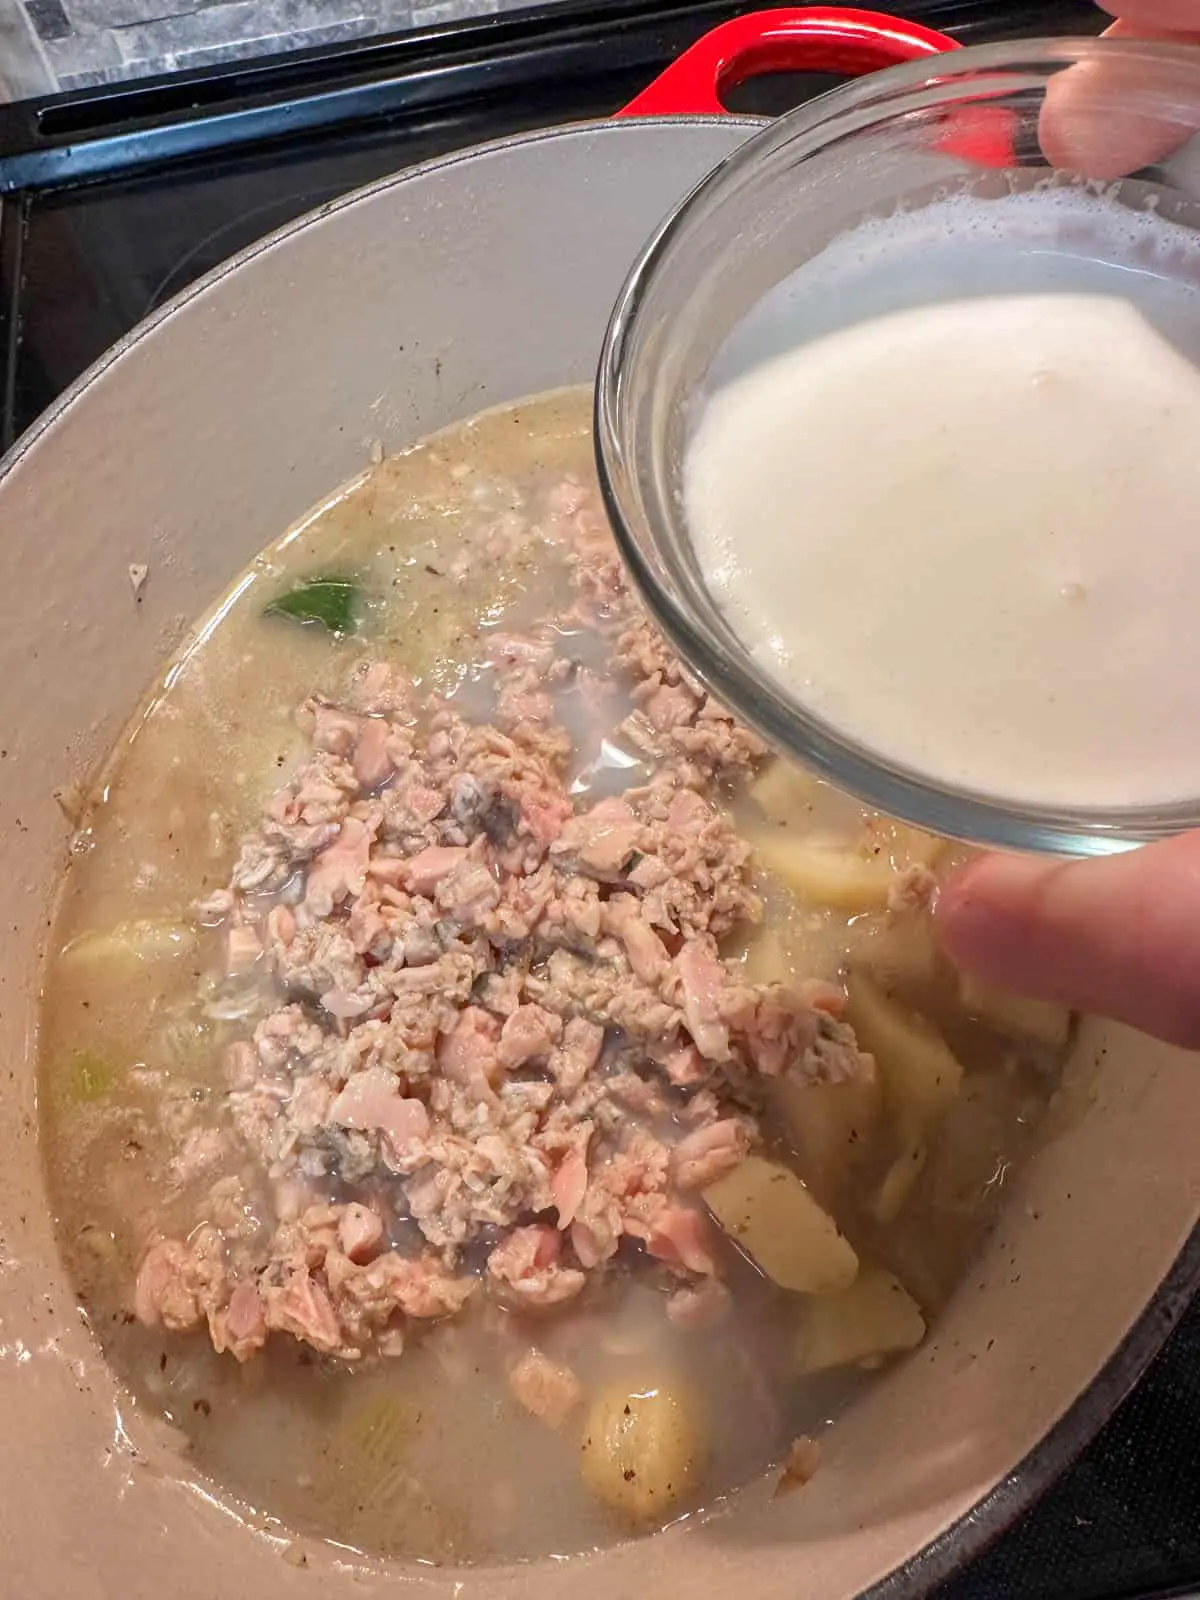 Minced clams and potatoes in broth in a Dutch oven. There is a person holding a small bowl with cream above the Dutch oven.